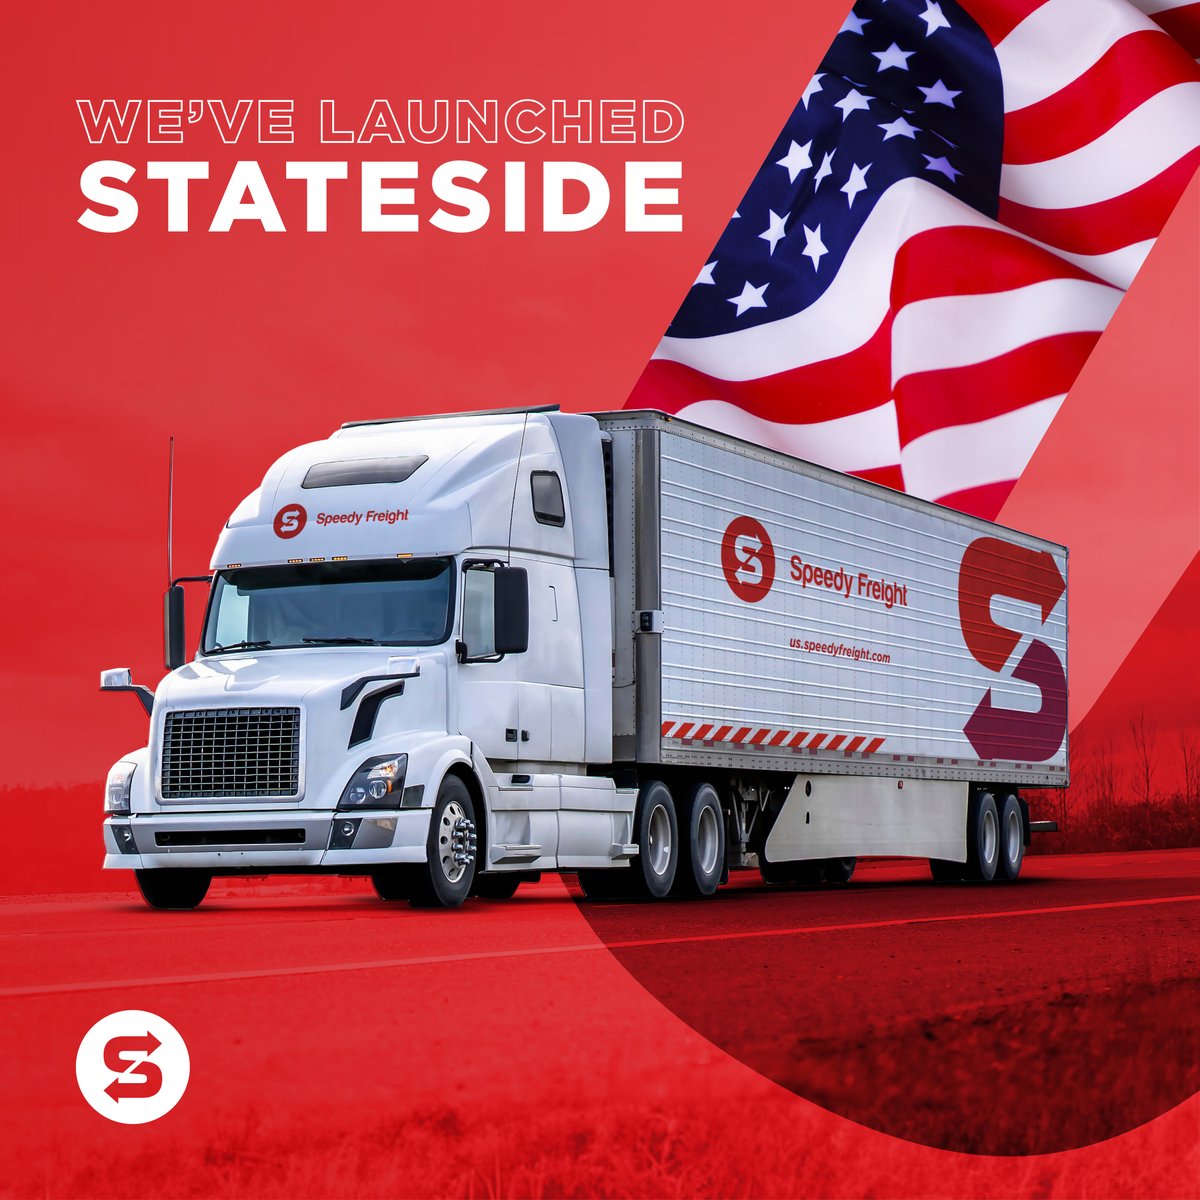 We're thrilled to announce our expansion across the USA, with our first US office in Dallas, Texas! As always, our Speedy promise remains the same—we’re committed to delivering logistics excellence. ➡️ Follow us @SpeedyFreightUS for more updates!